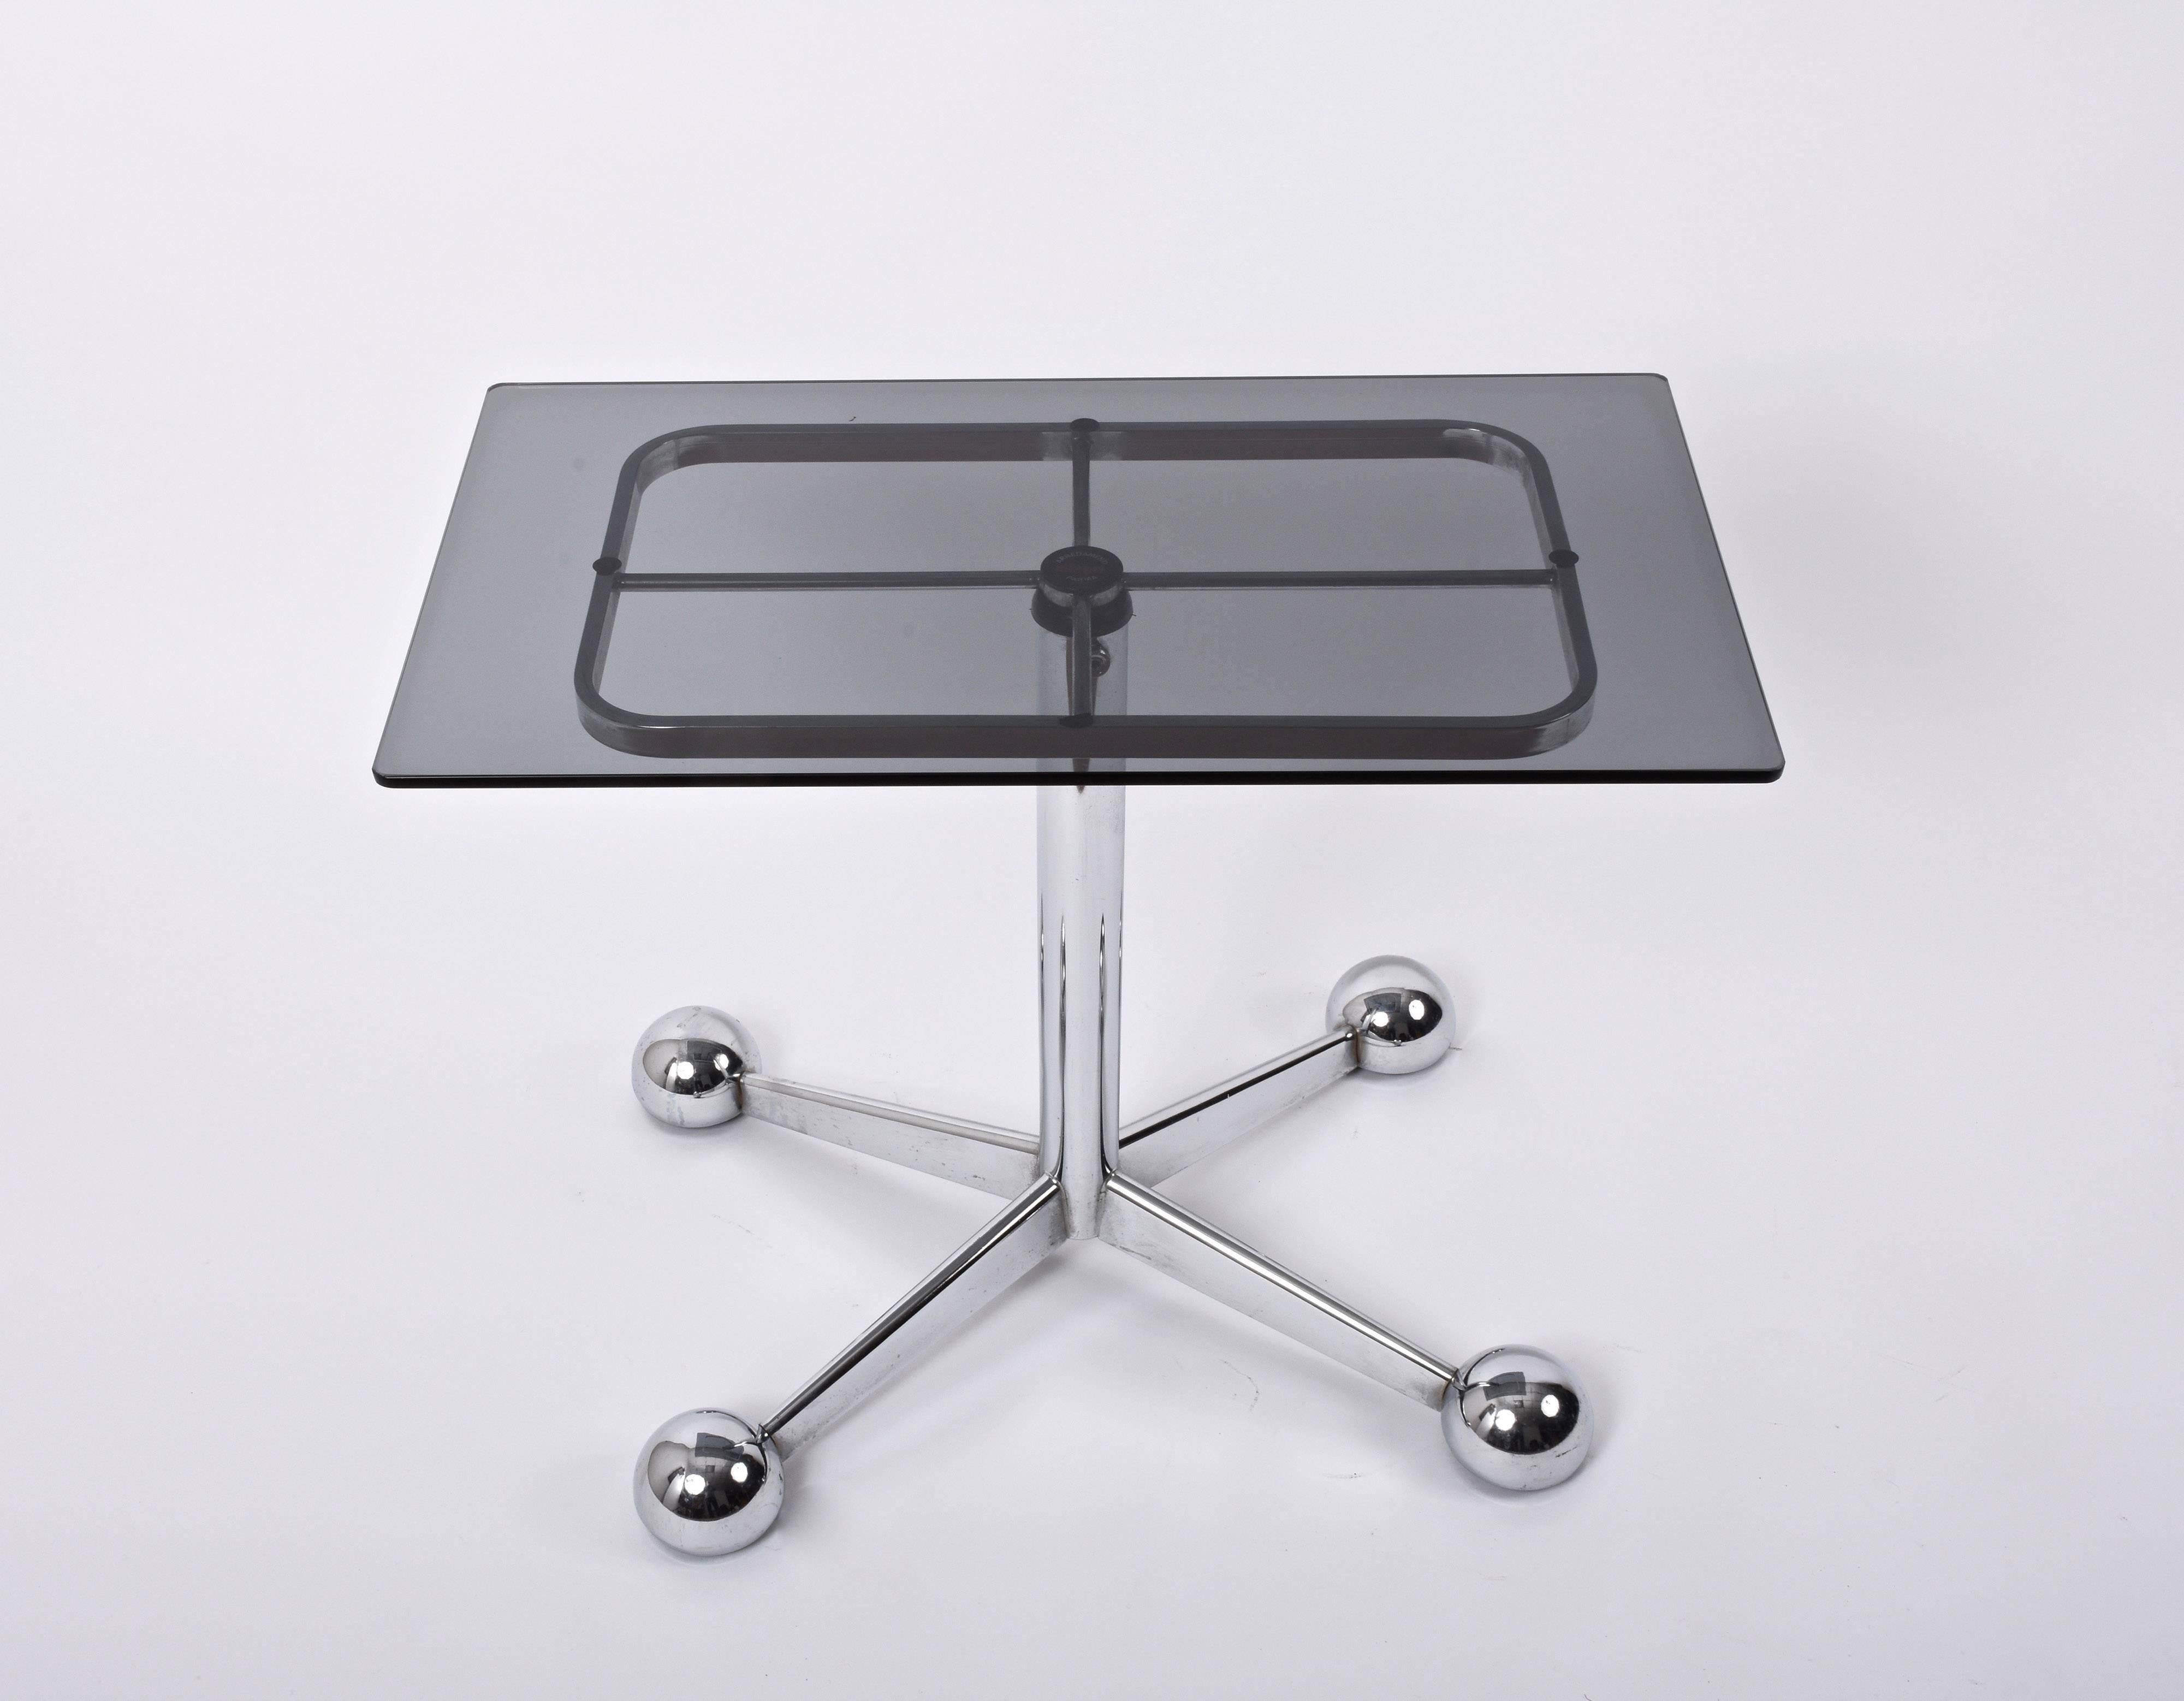 Magnificent adjustable bar trolley table produced by Allegri Arredamenti in Parma, Italy, during the 1970s.

This serving table has a metal chrome base with a smoked glass top. The rounded shaped wheel covers show a clear space-age